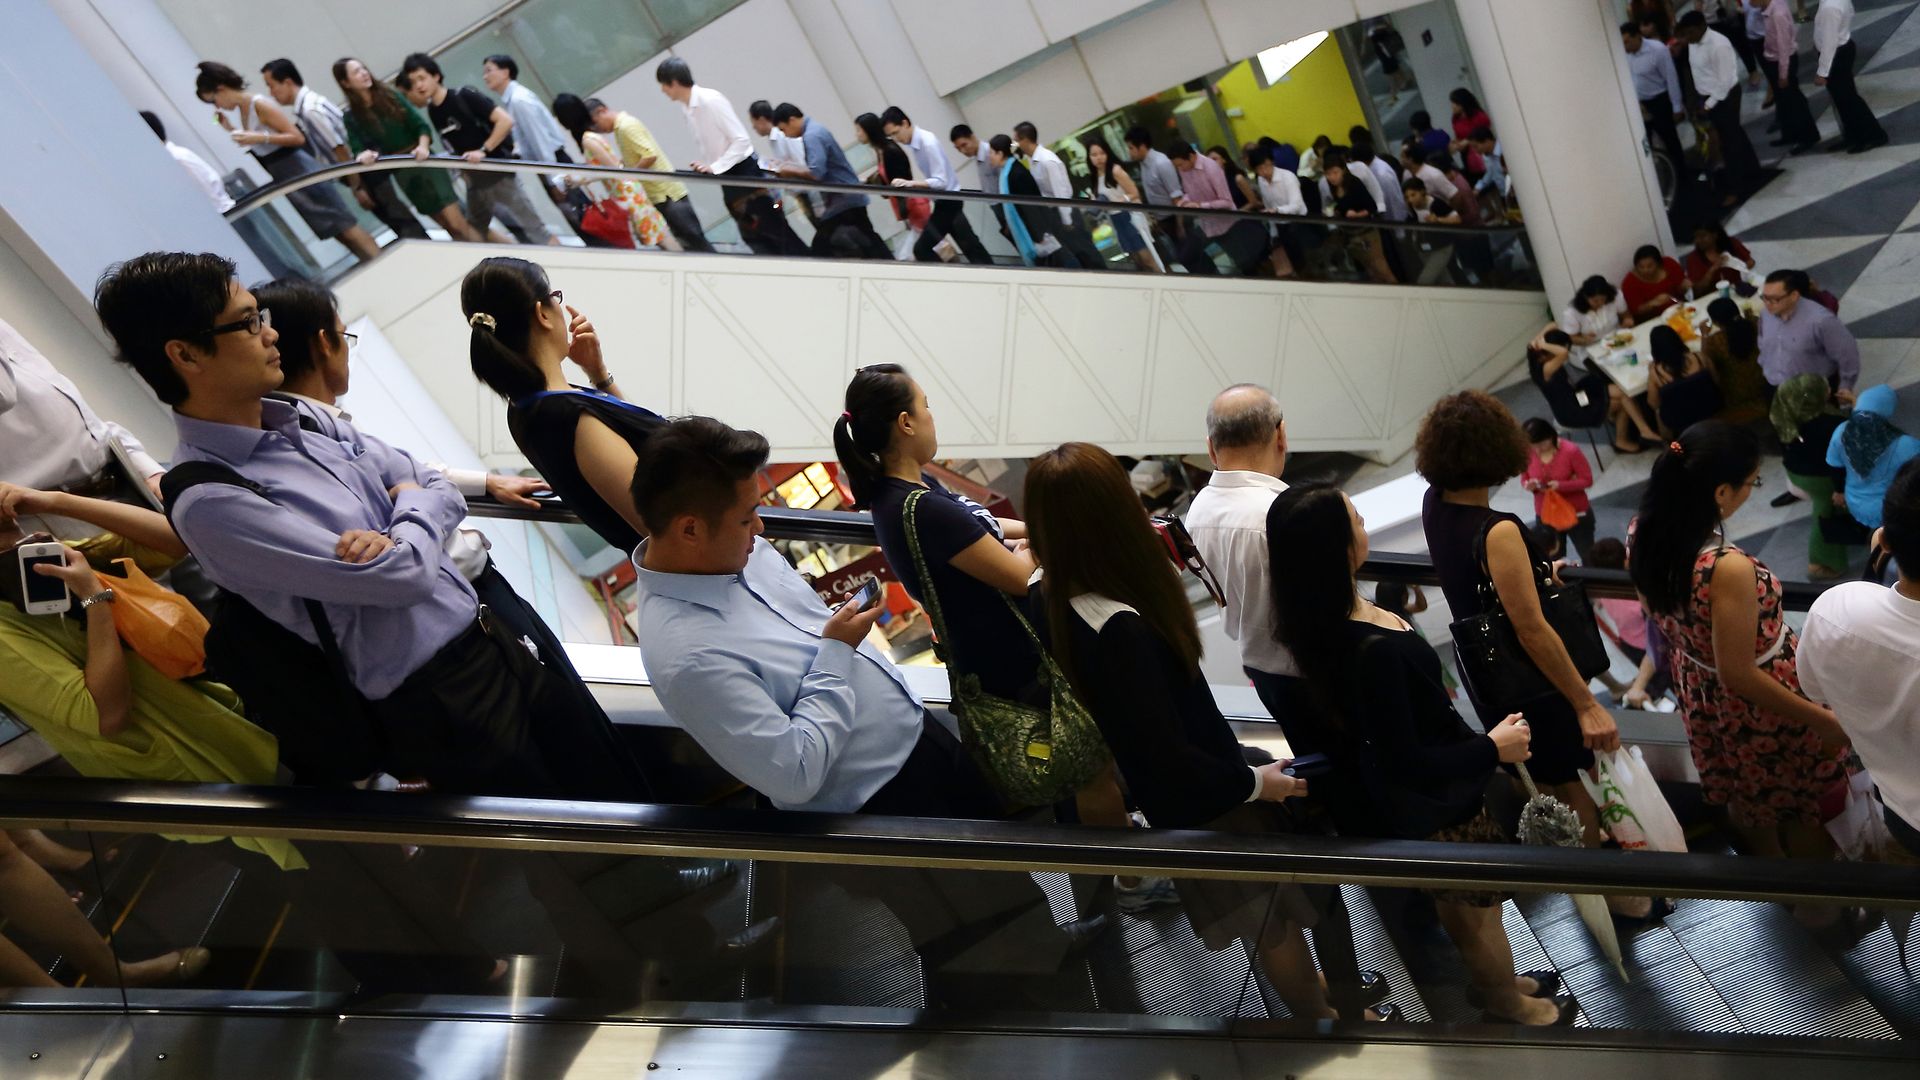 Commuters line the escalators at lunch hour at Raffles Place in Singapore